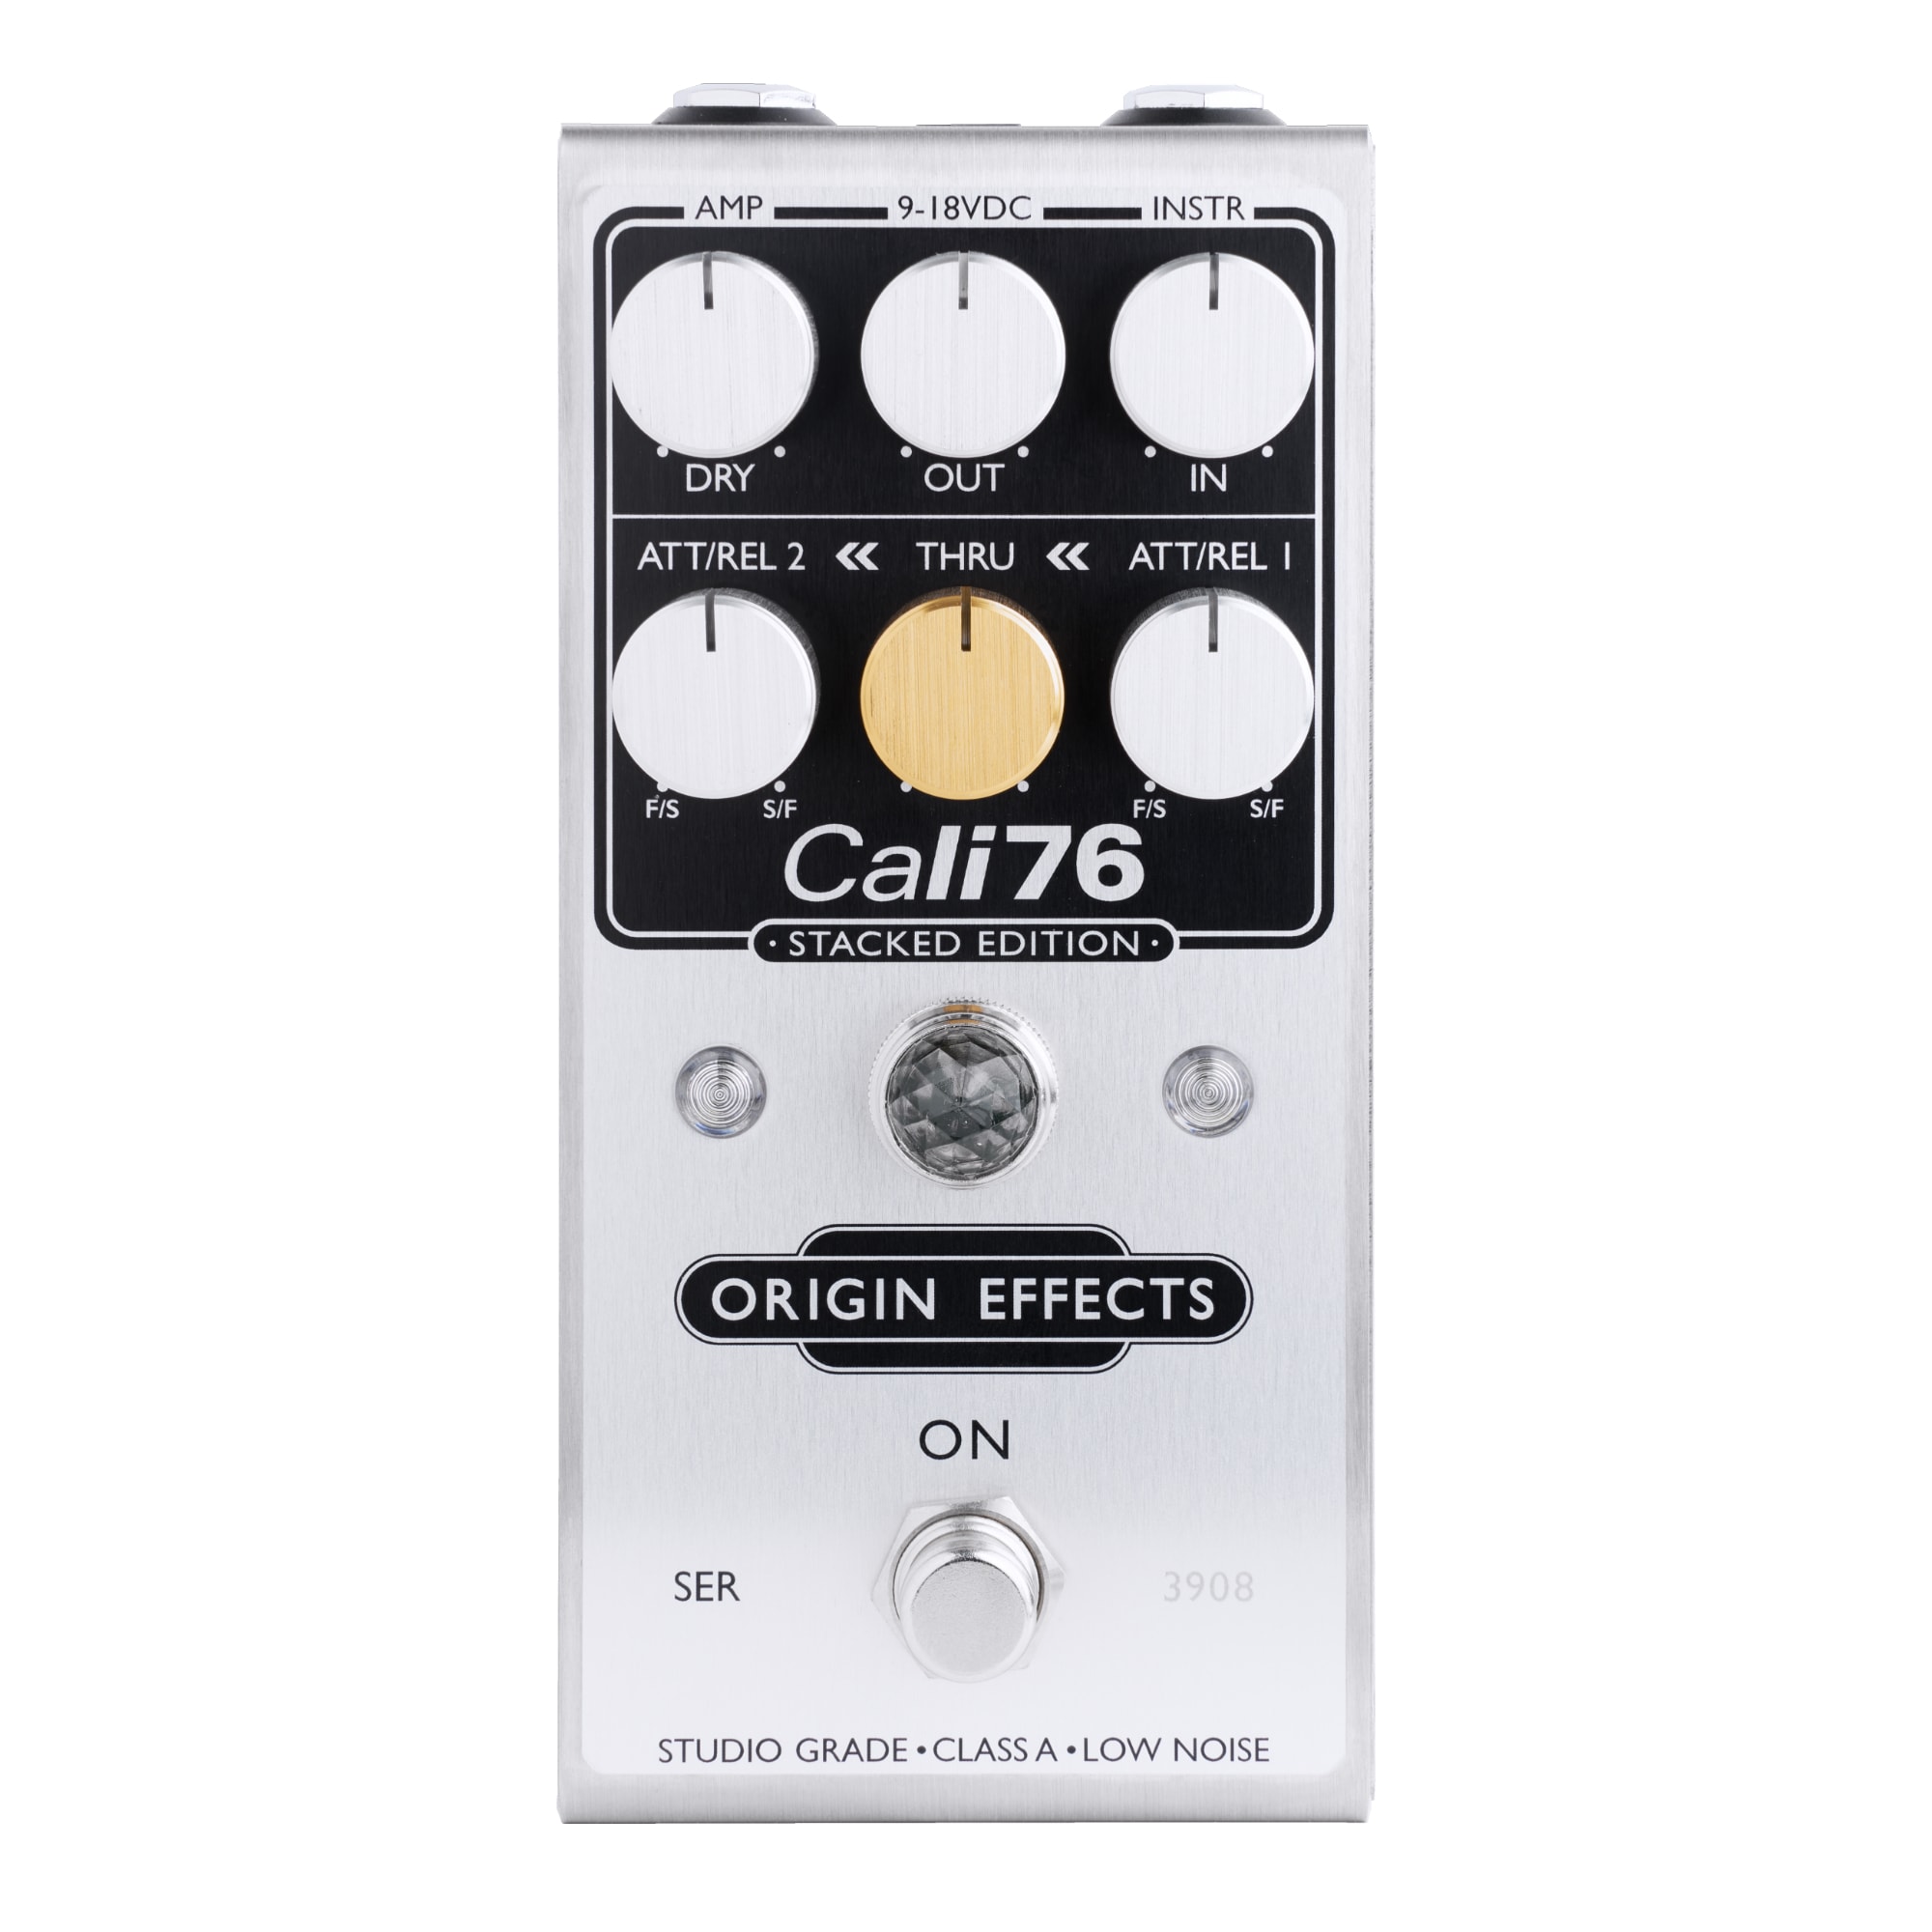 Cali76 Stacked Edition – Origin Effects